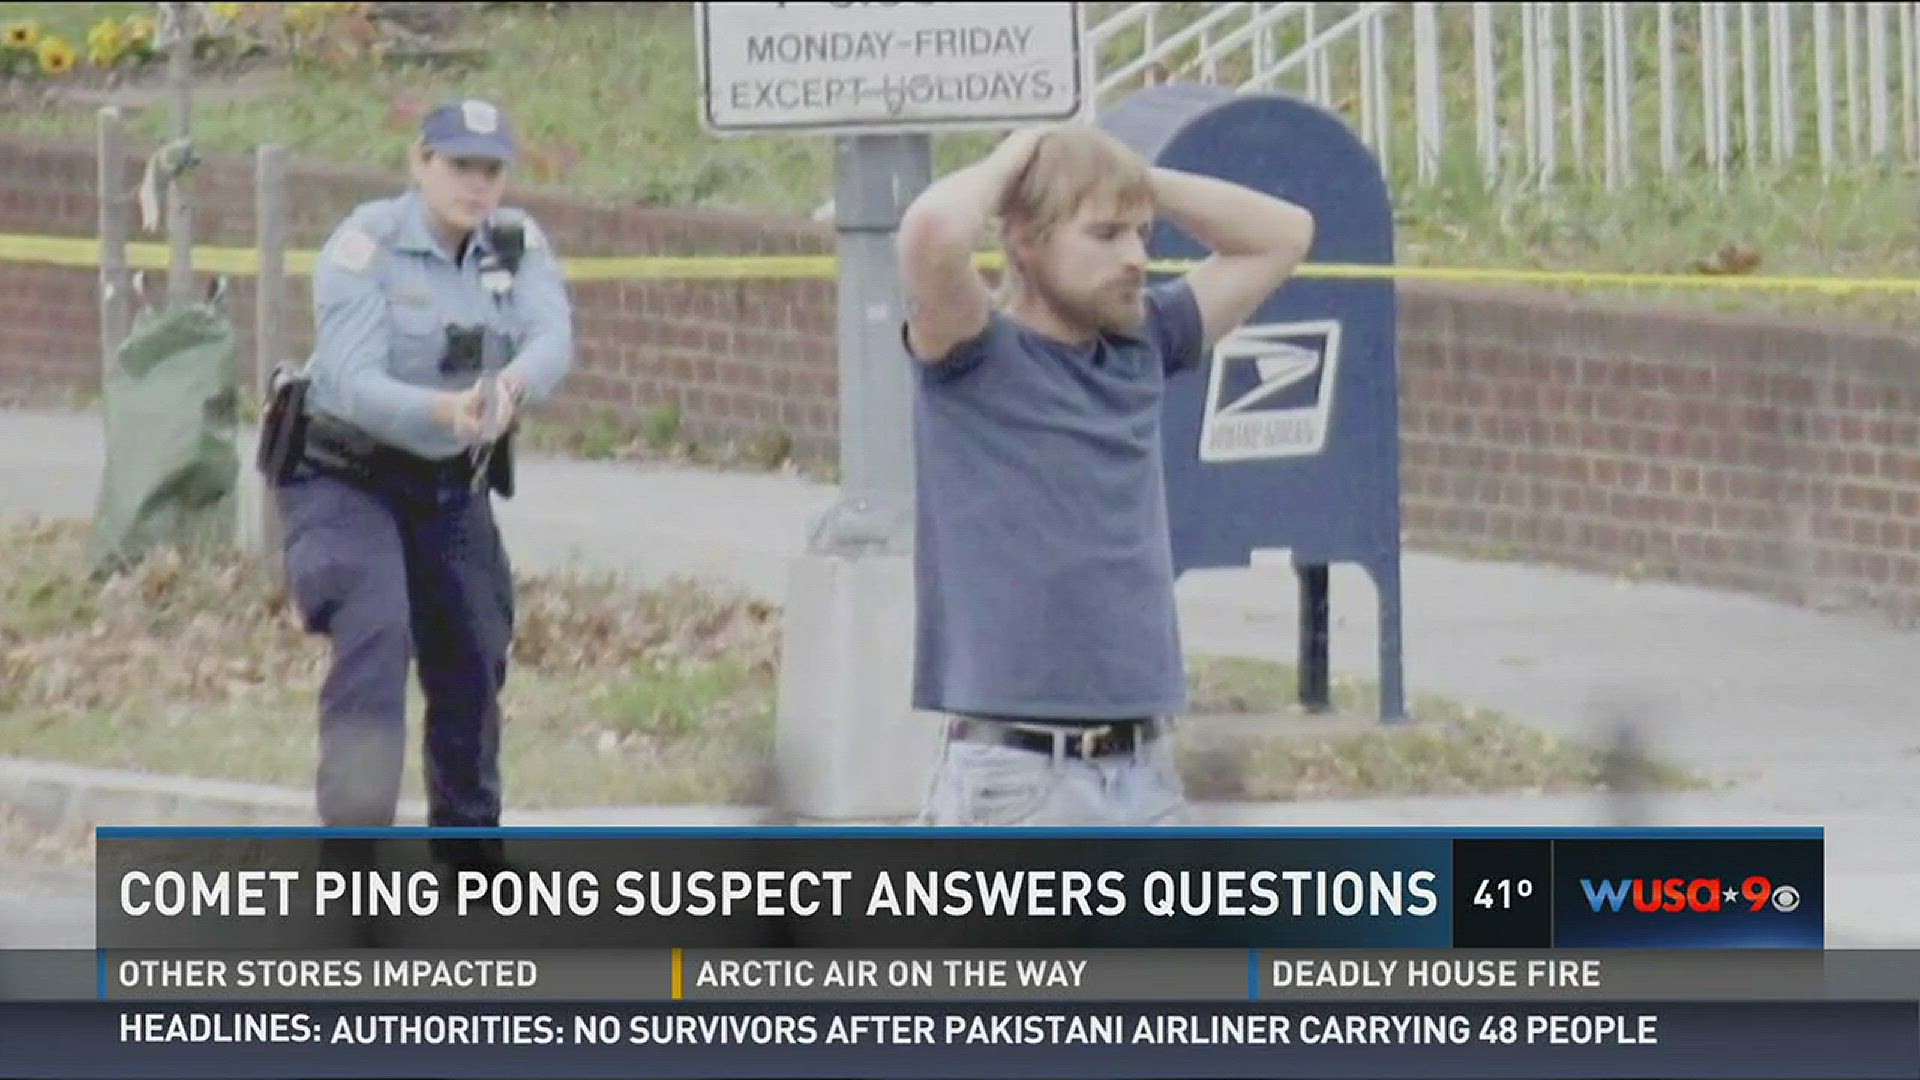 Comet Ping Pong suspect answers questions